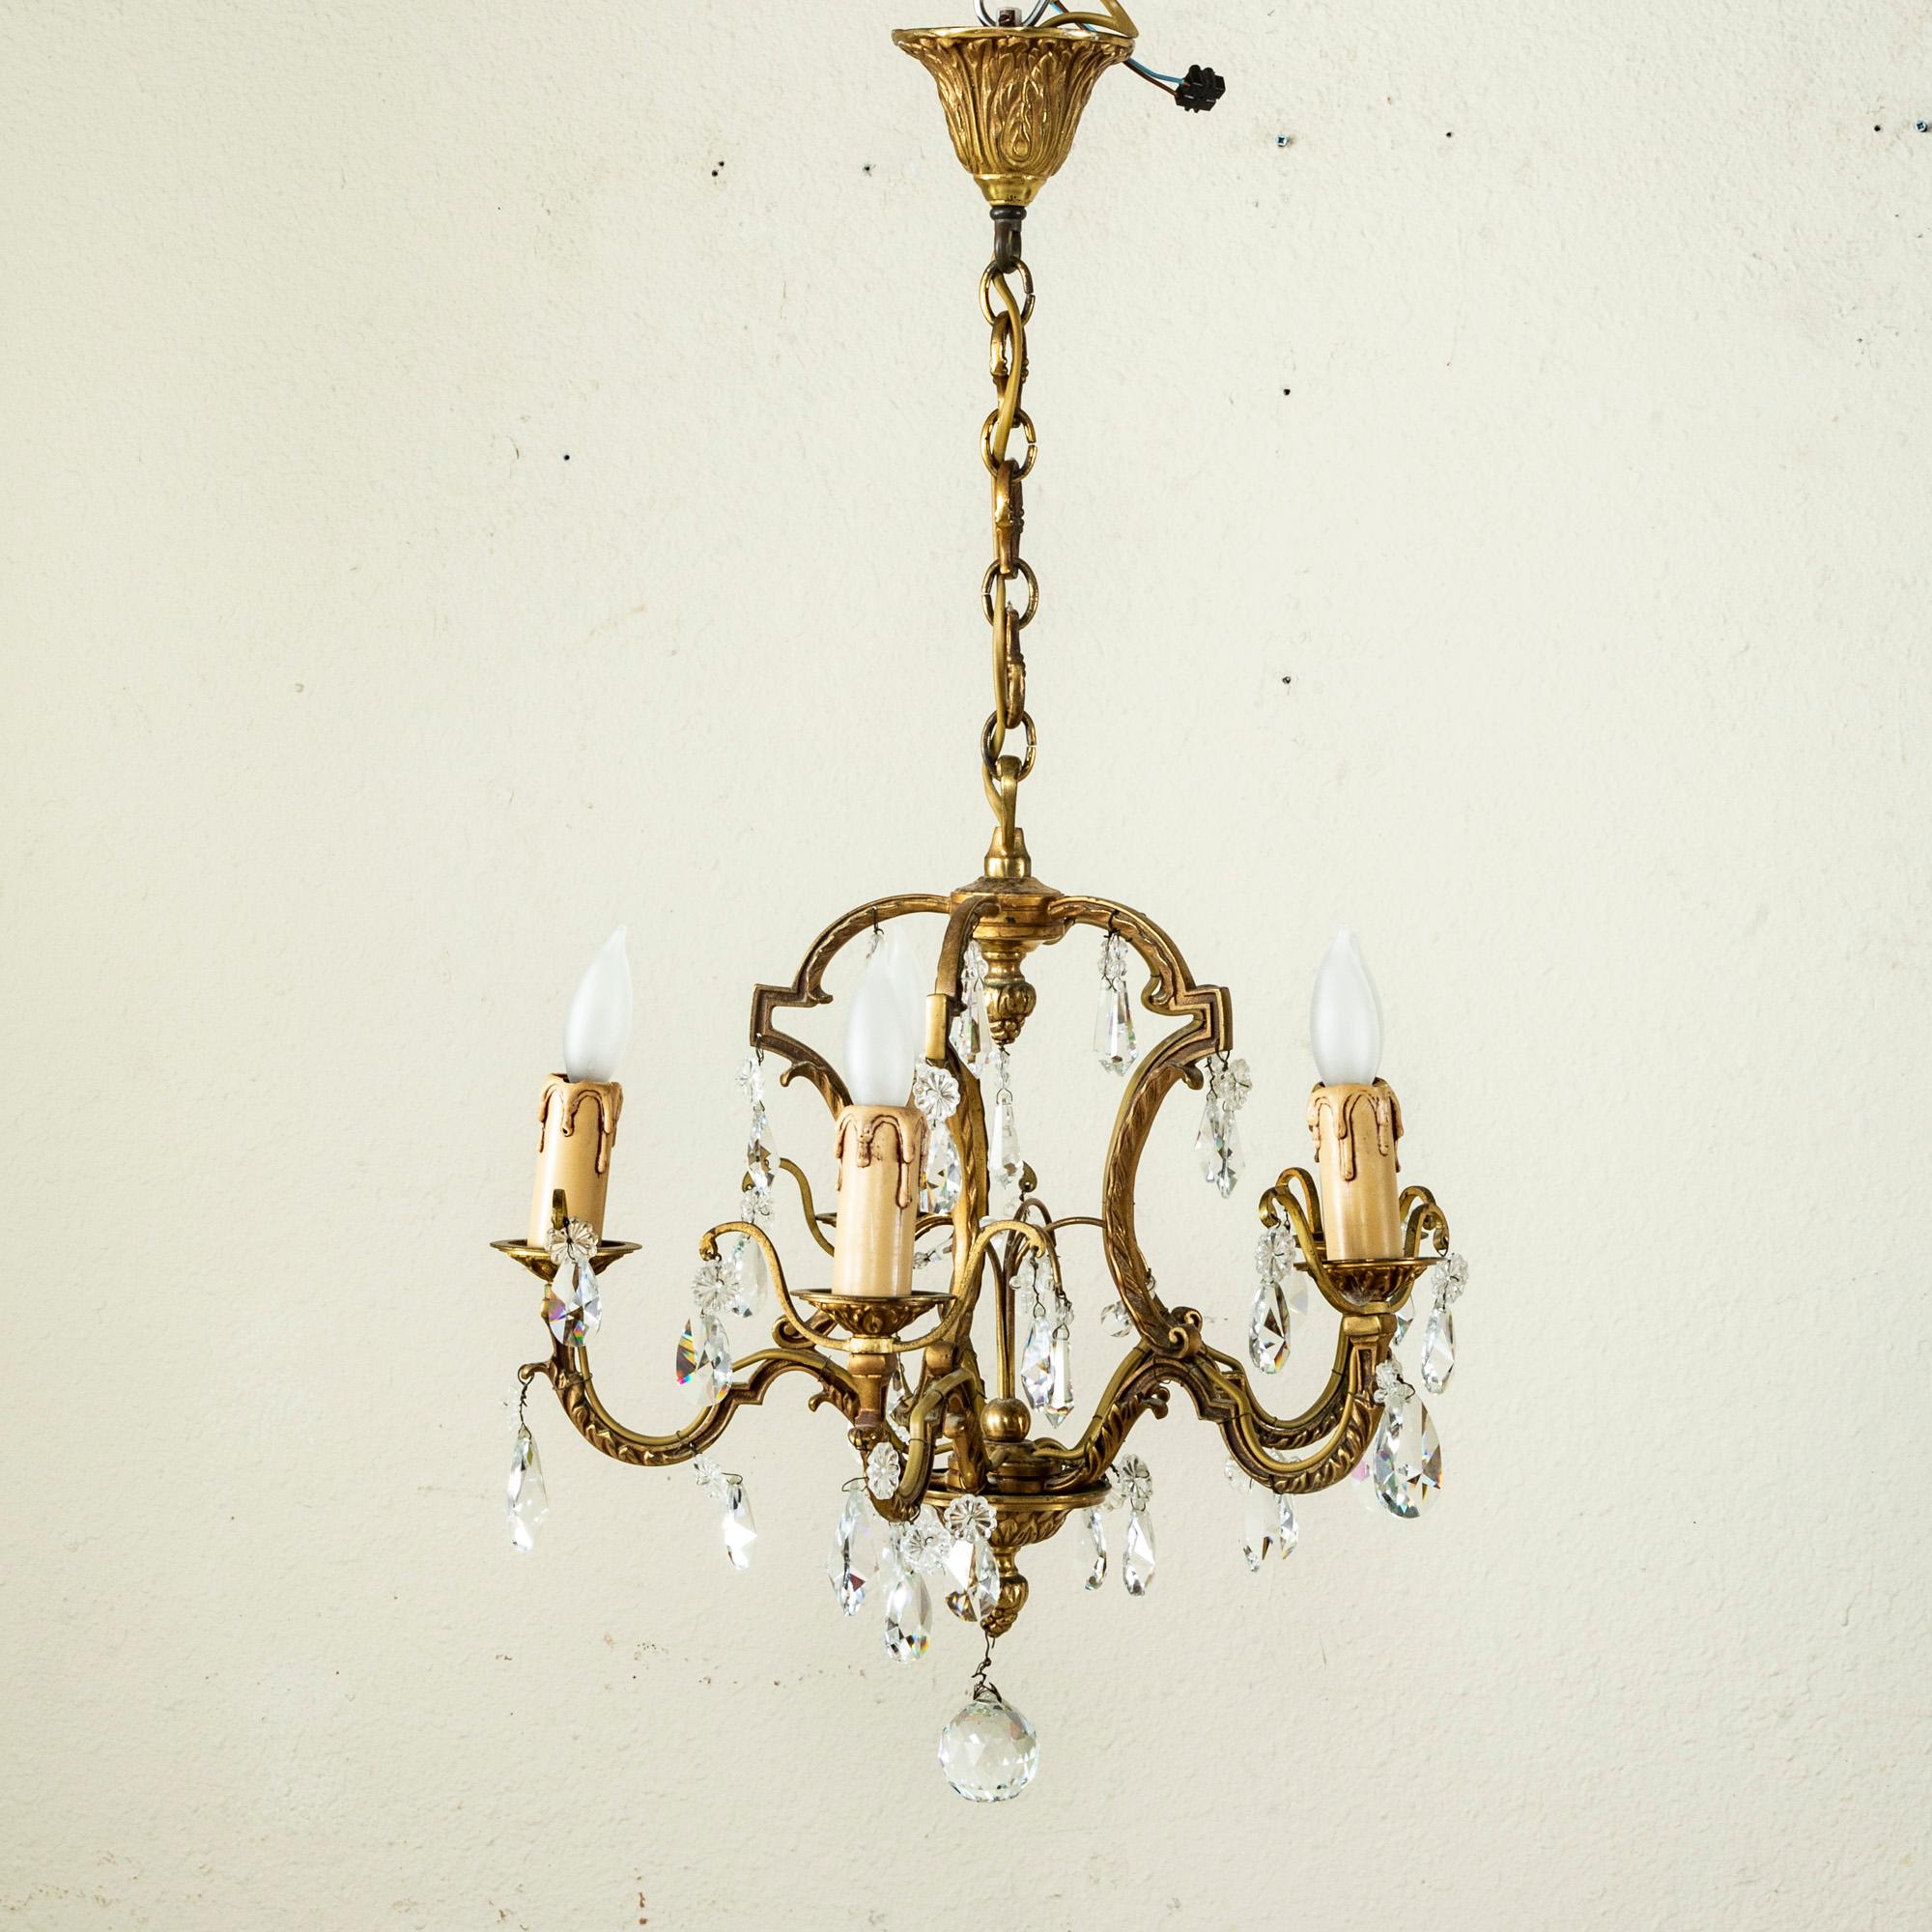 Mid-20th Century French Bronze and Strass Crystal Chandelier In Good Condition For Sale In Fayetteville, AR